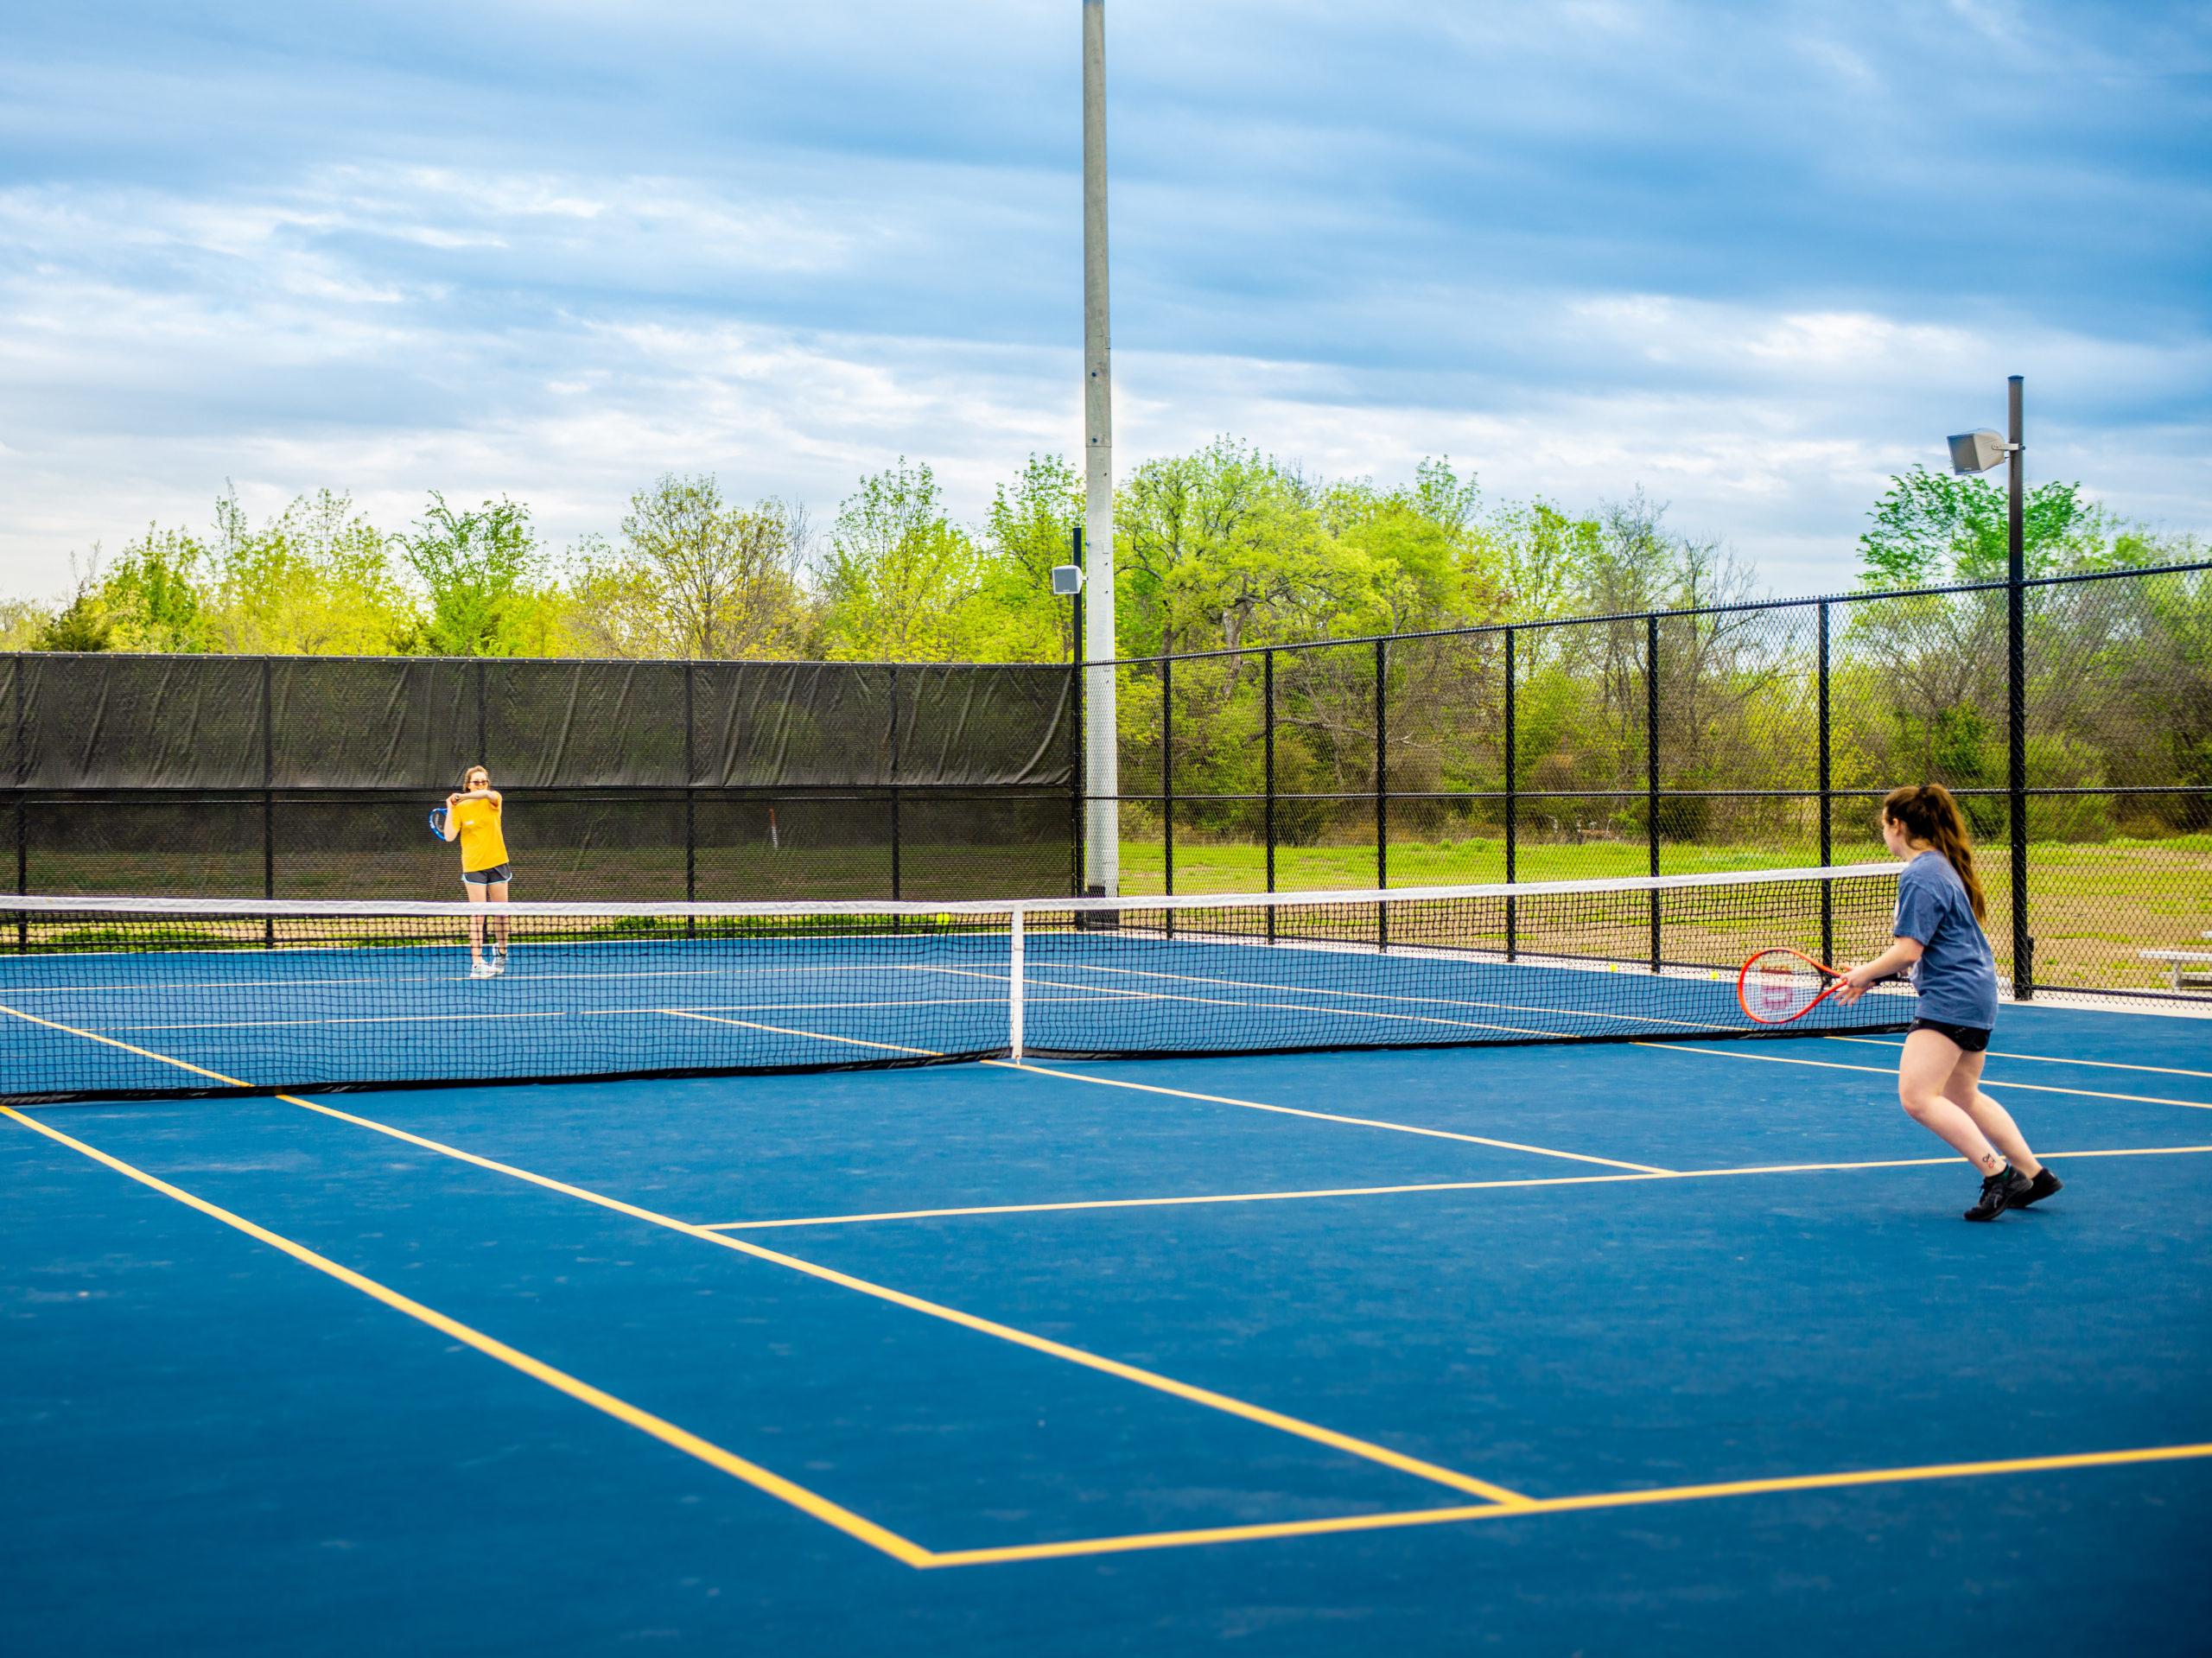 Tennis Courts at the Cain Sports Complex.